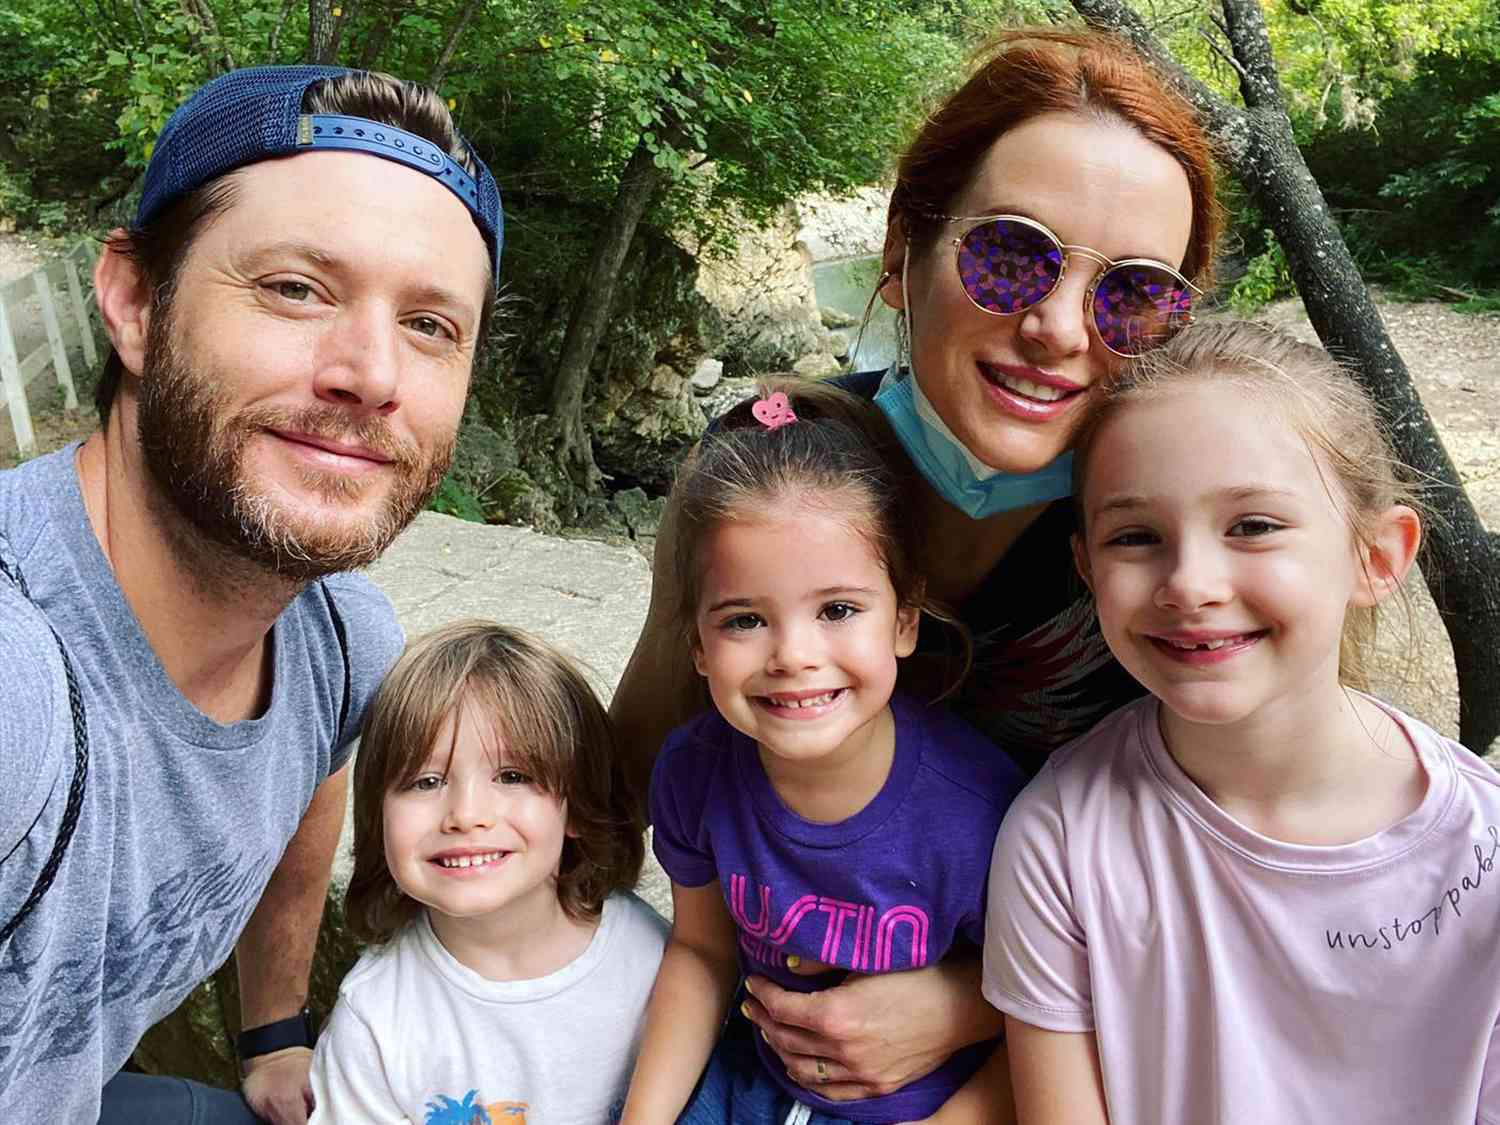 Justice Jay Ackles - The Daughter Of Jensen And Danneel Ackles